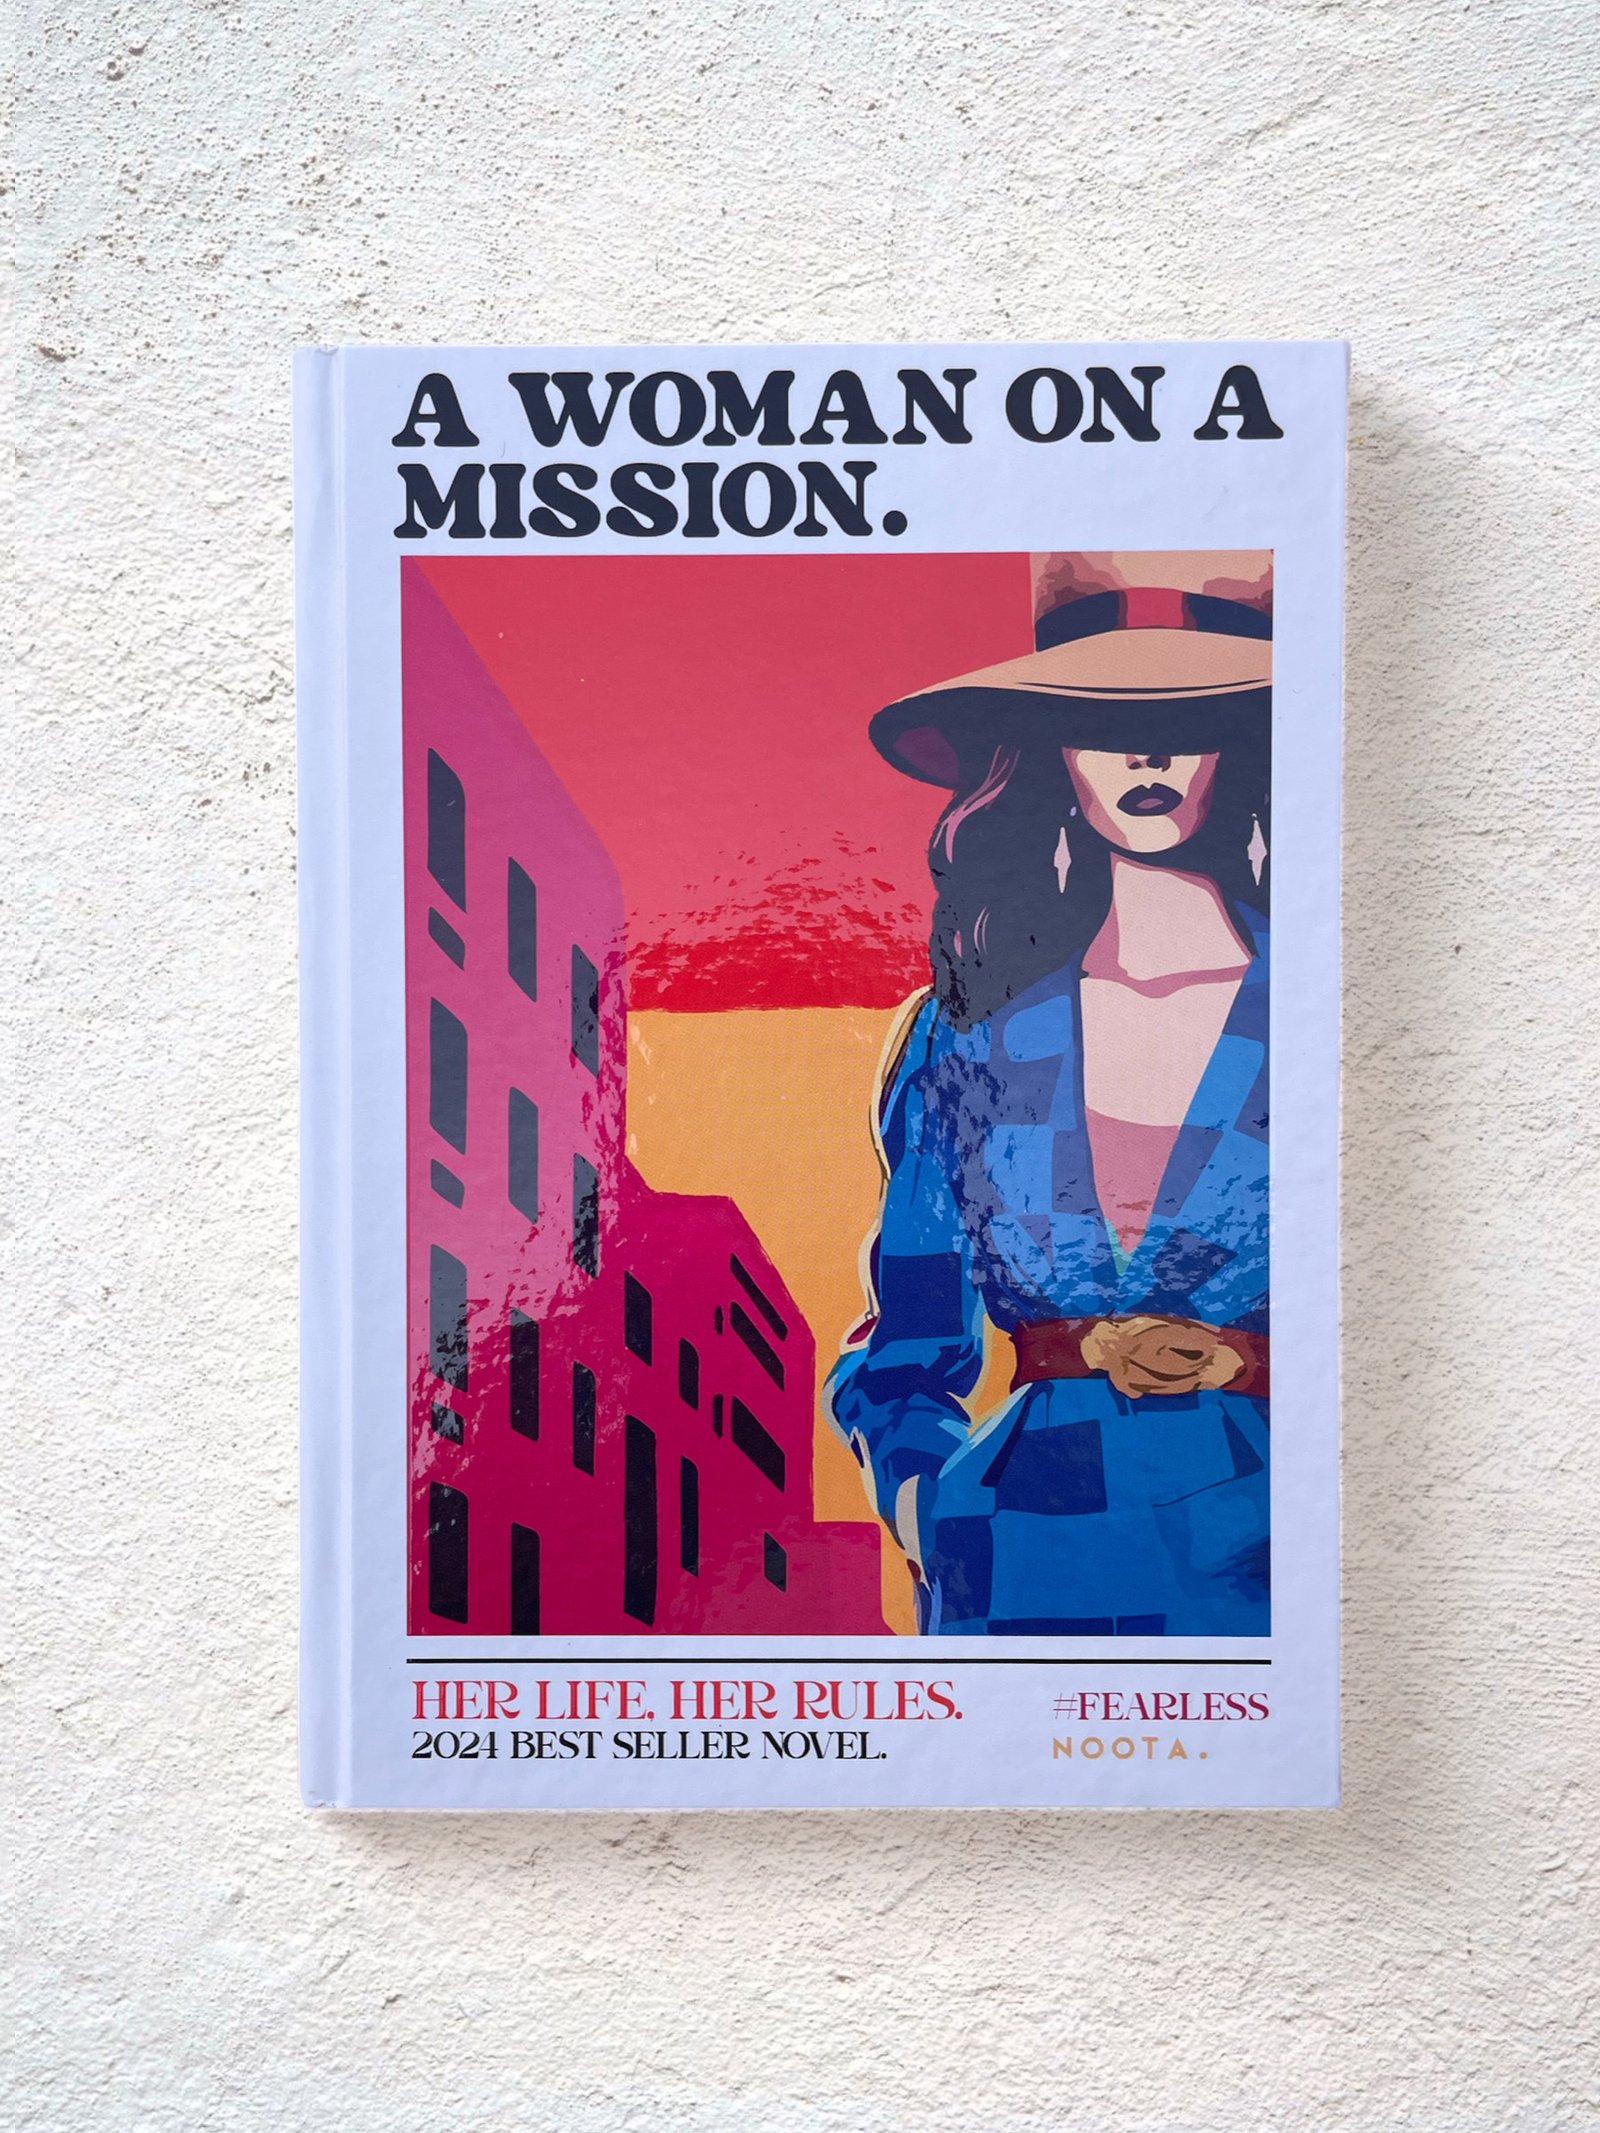 WOMAN ON A MISSION